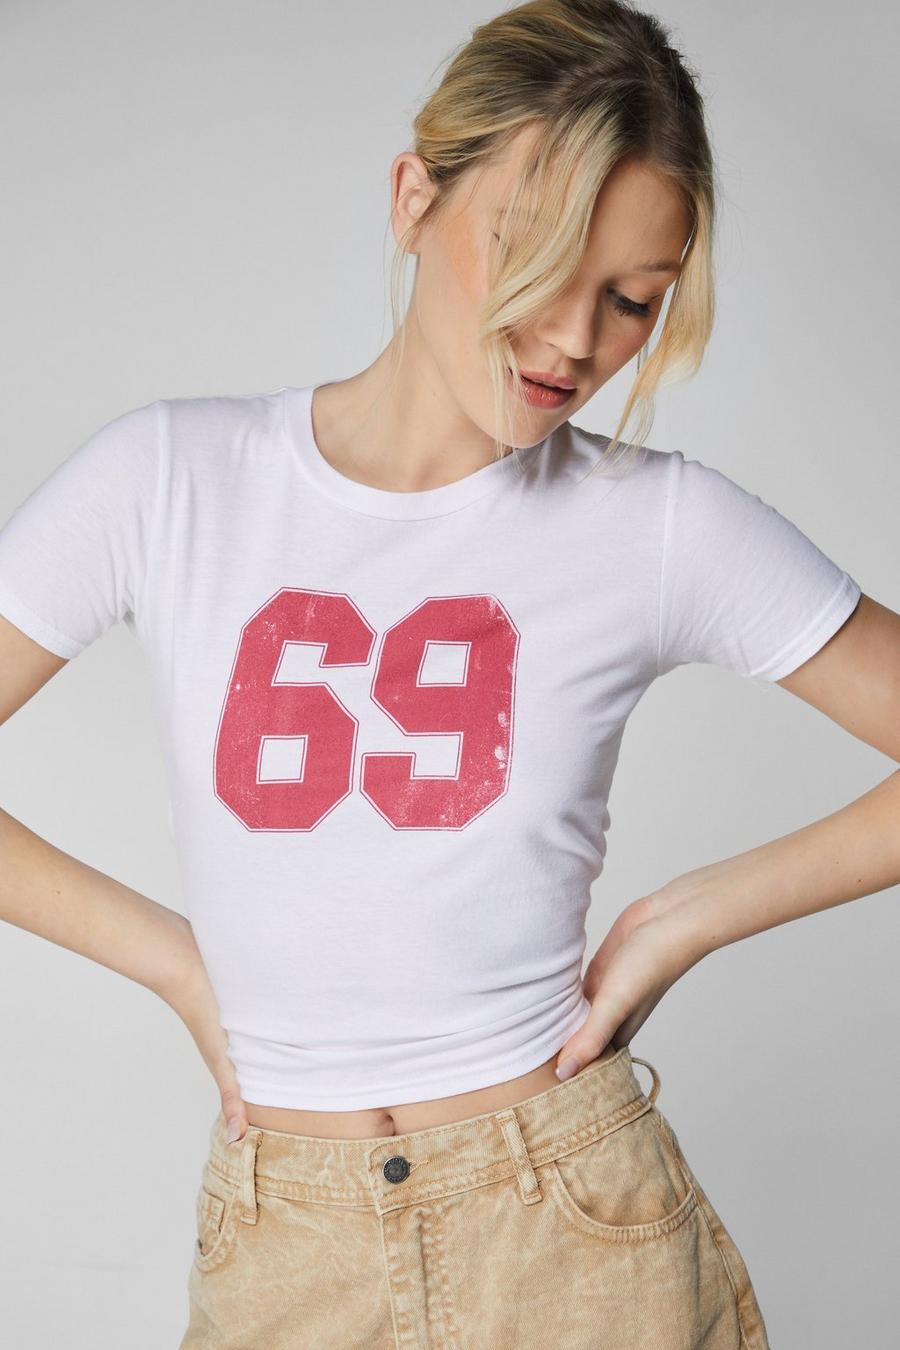 69 Front Graphic Baby Tee